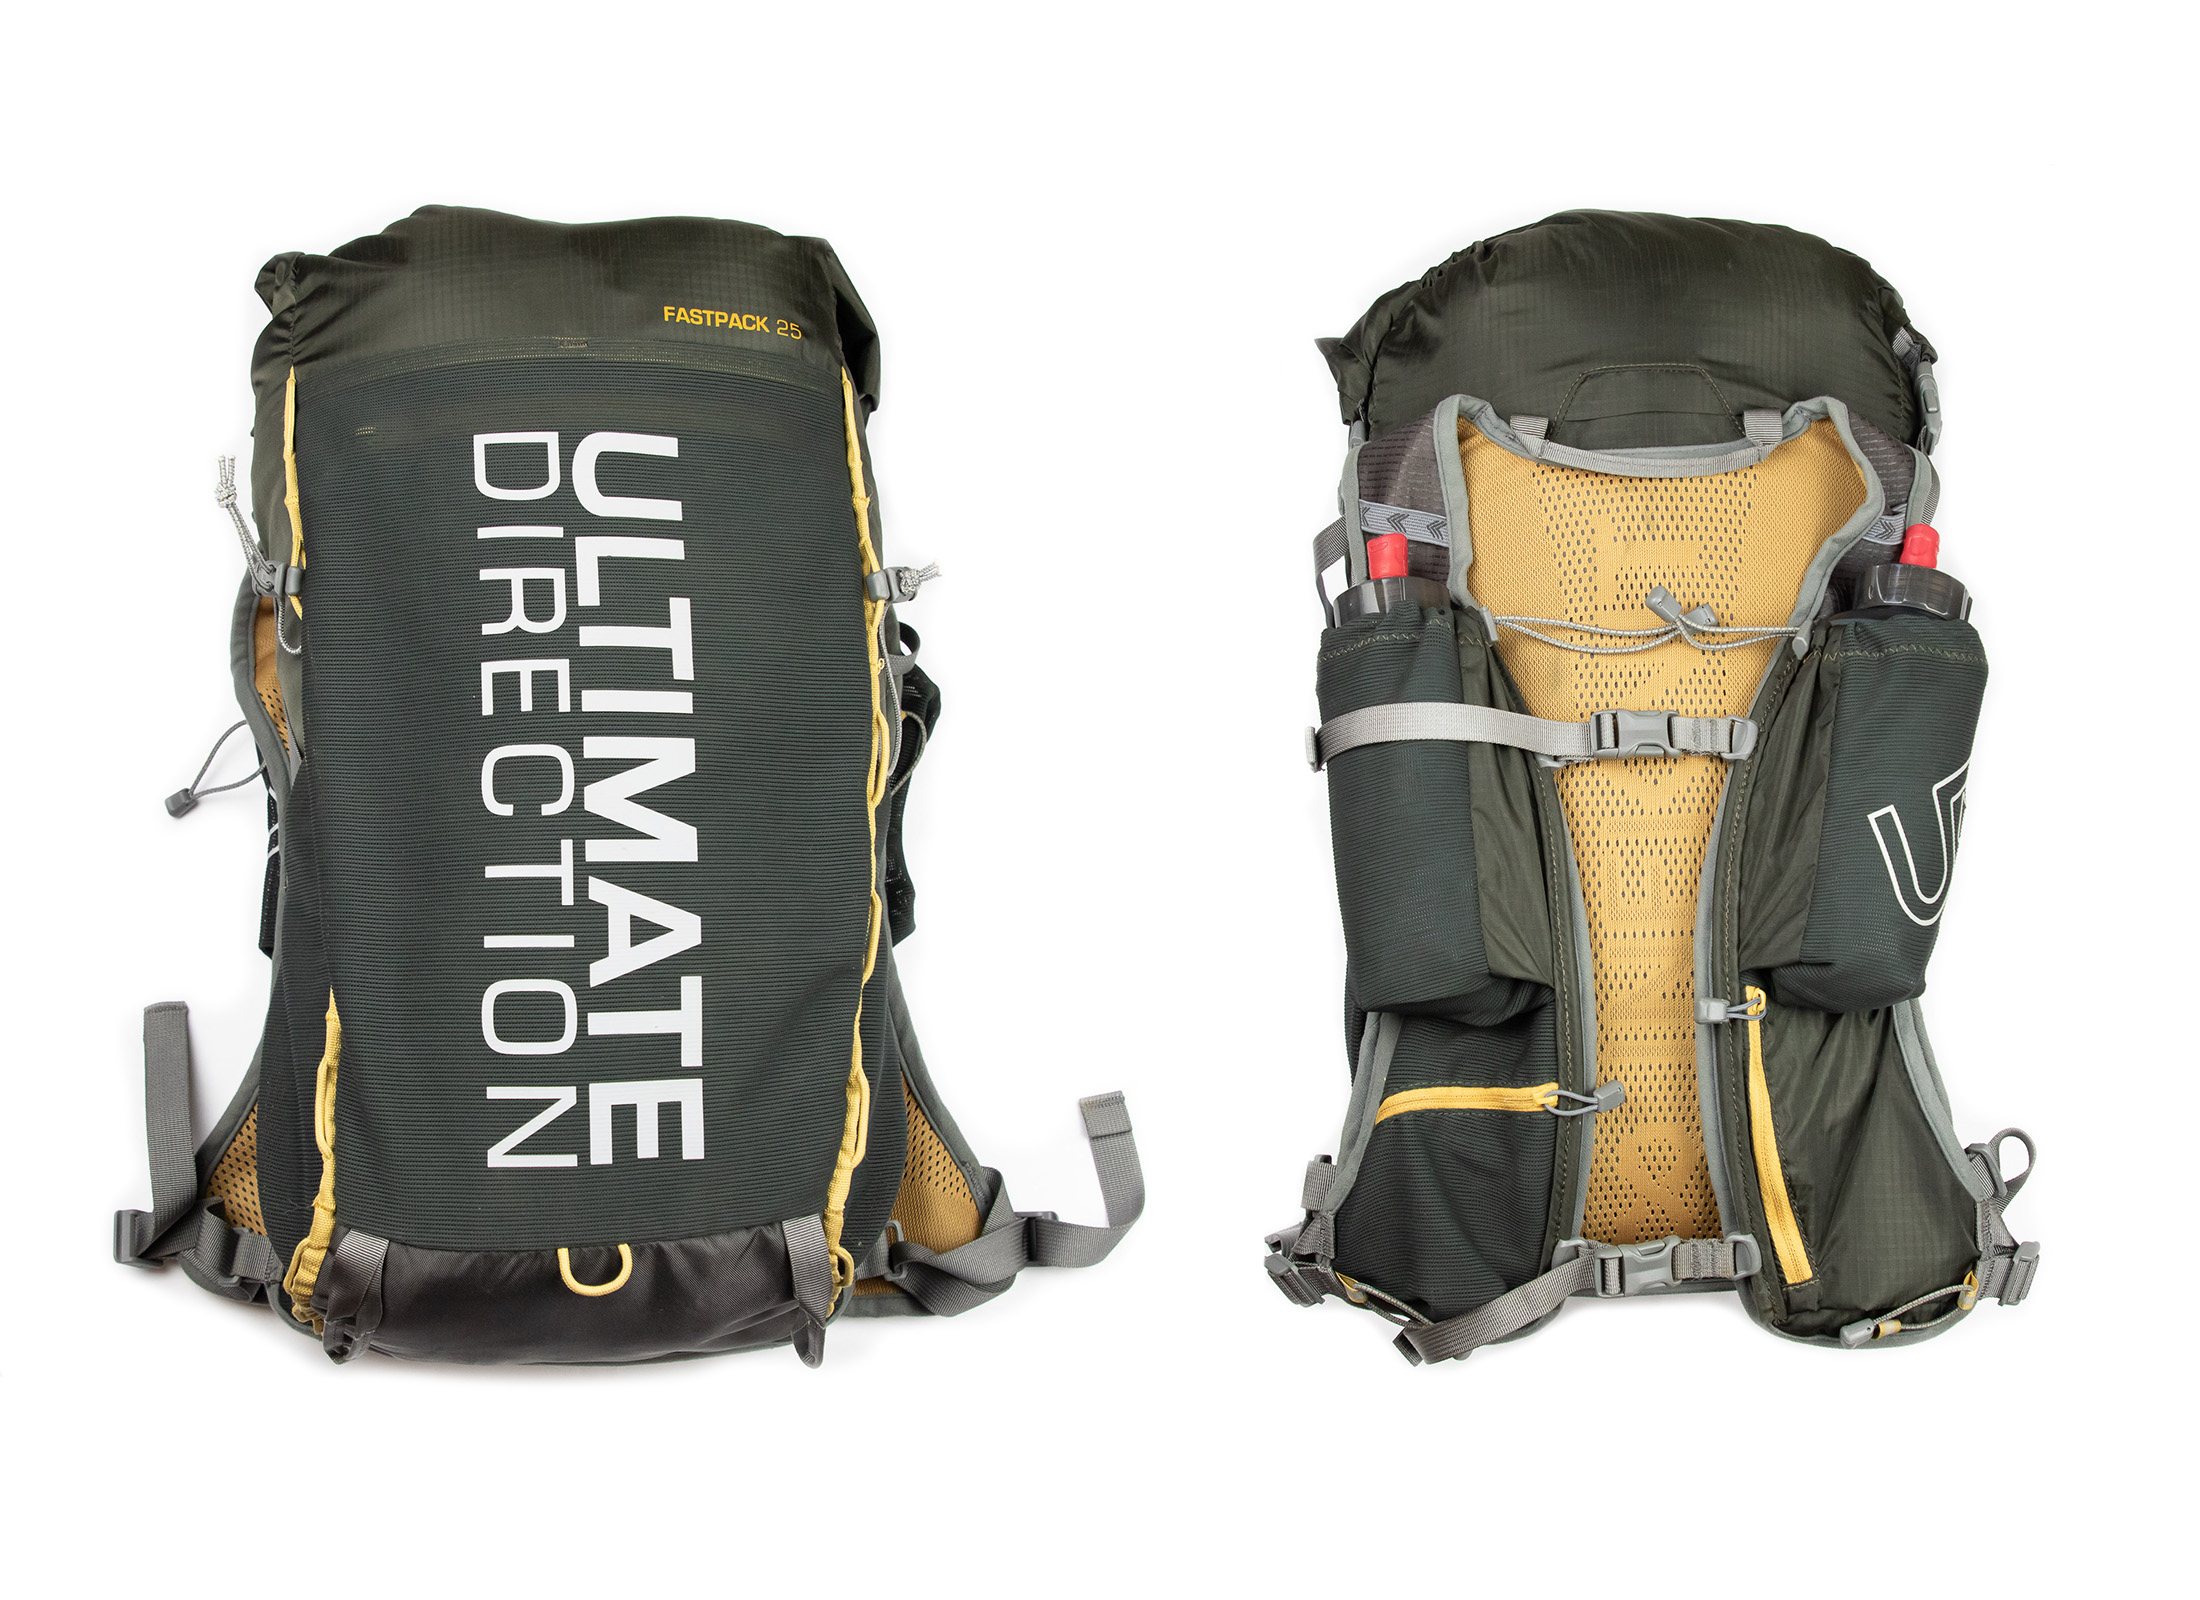 pack for fastpacking